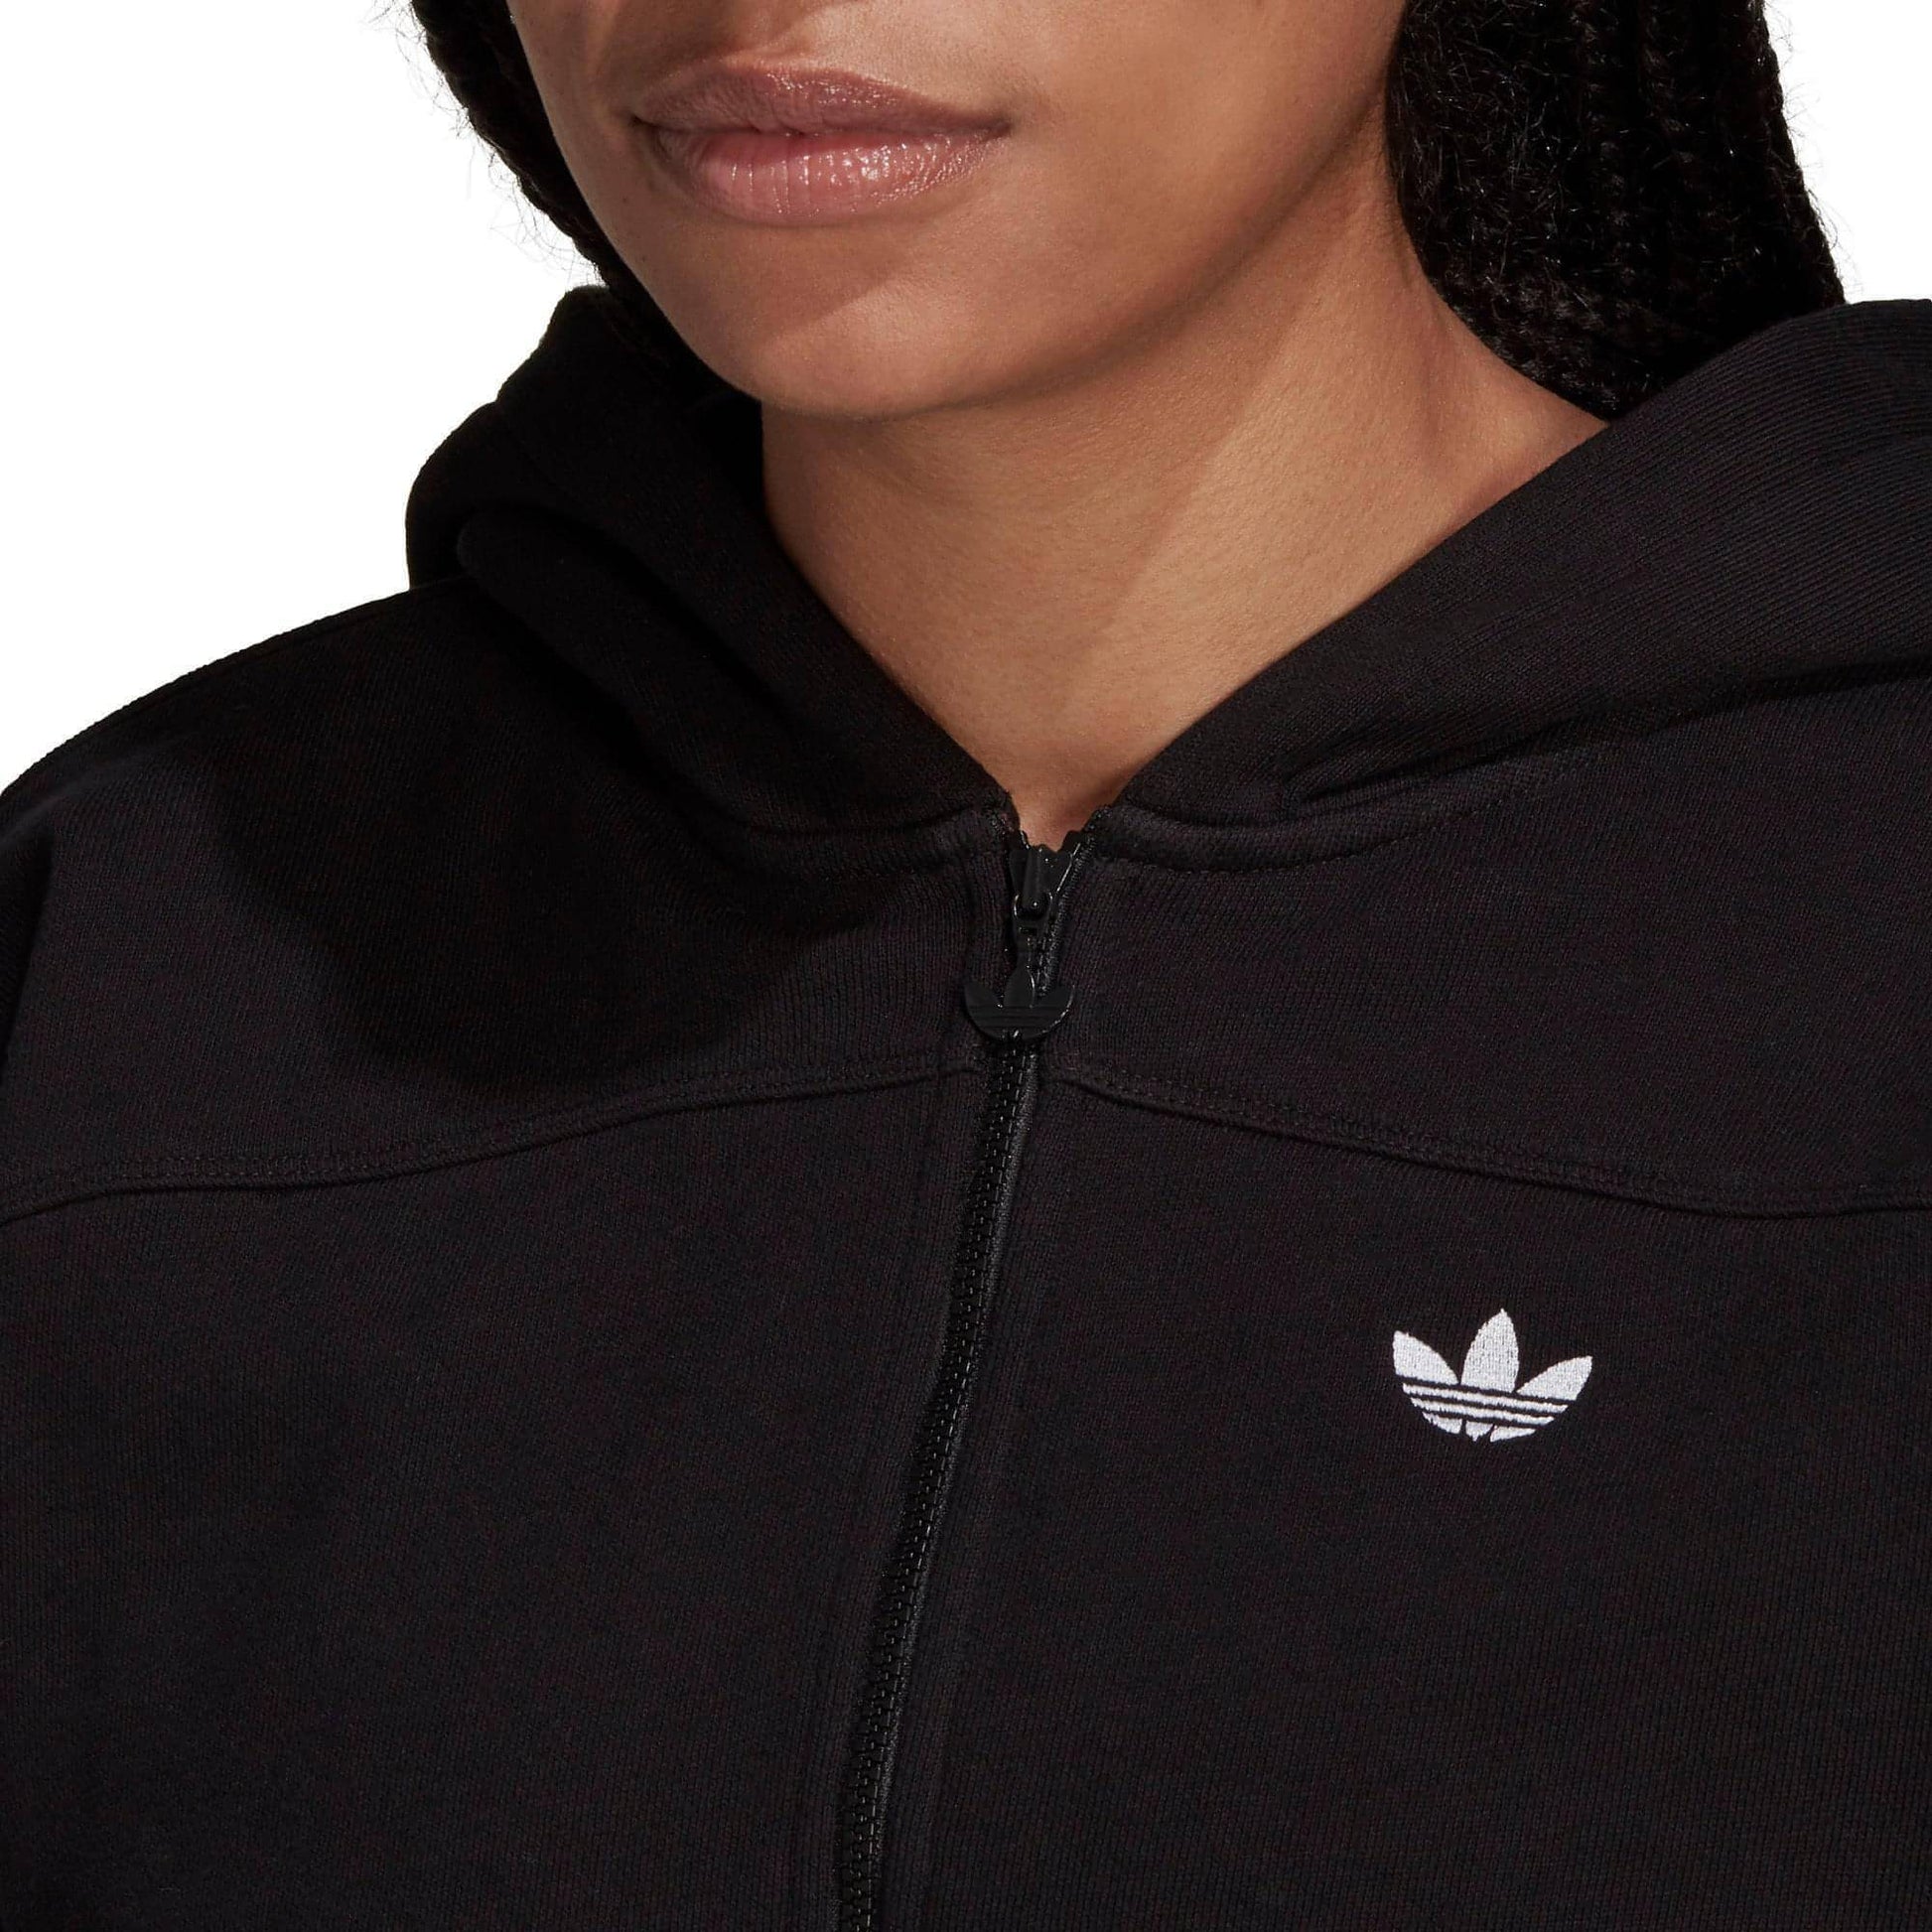 Adidas Cropped Track Top  Details